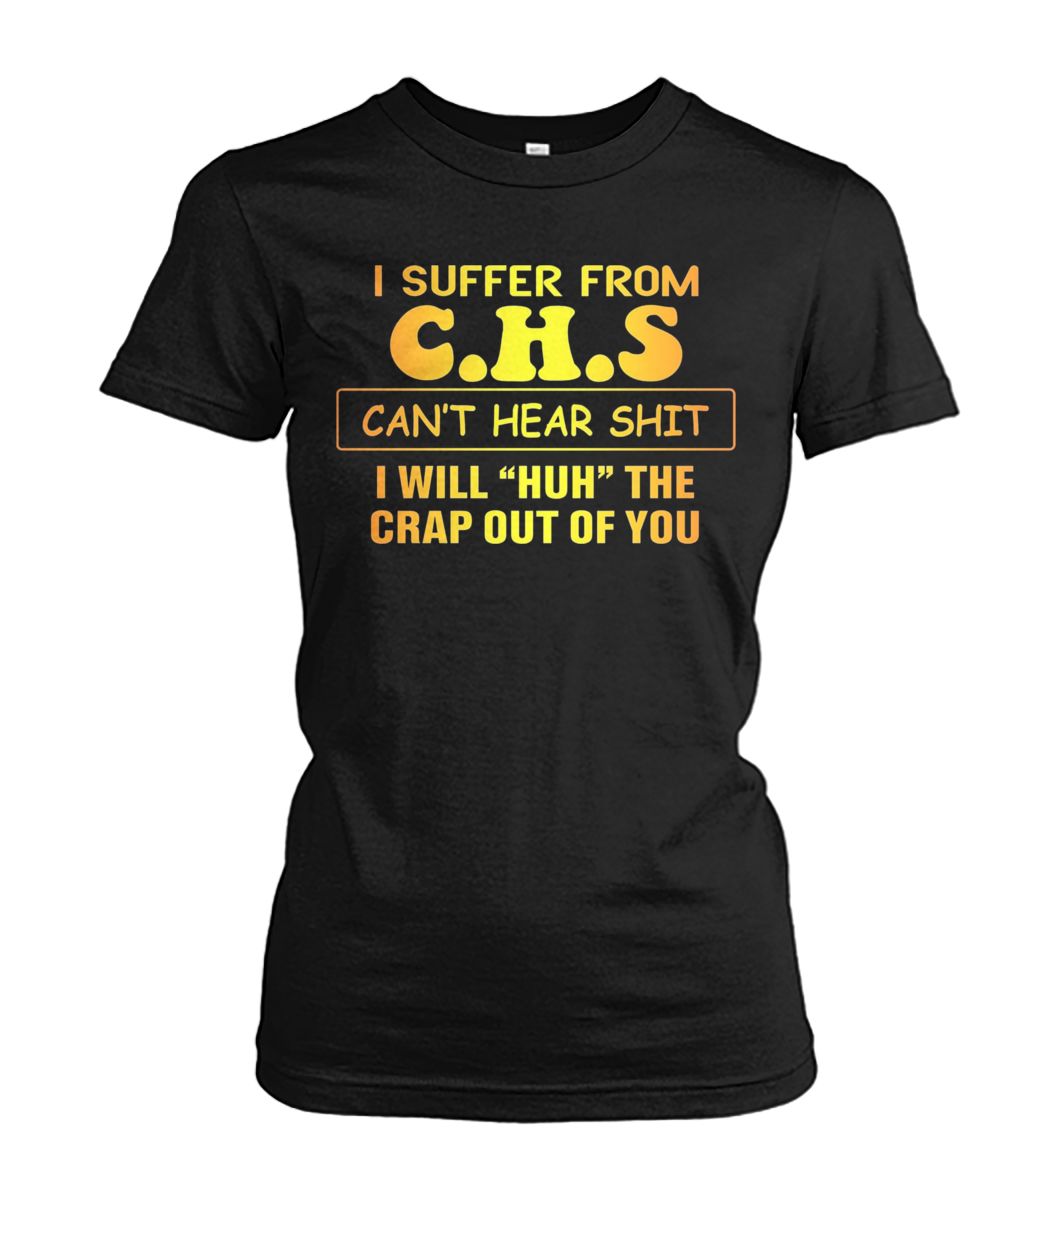 I suffer from CHS can't hear shit I will huh the crap out of you women's crew tee